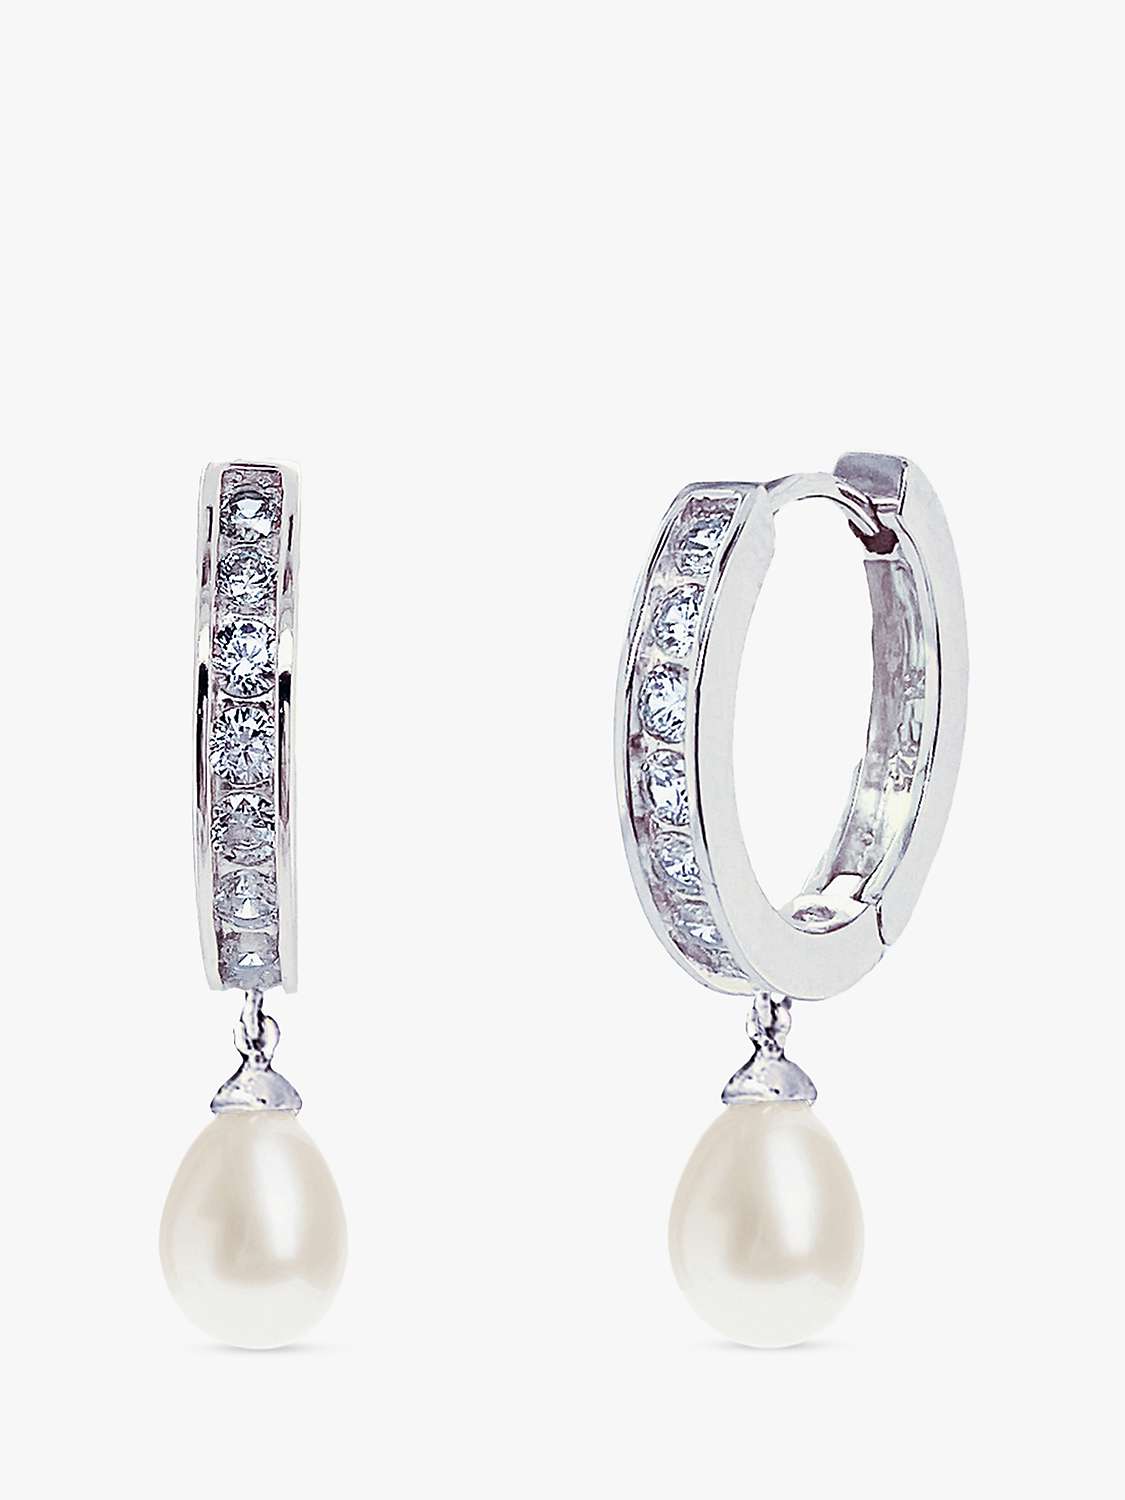 Buy Ivory & Co. Canterbury Crystal and Faux Pearl Hoop Earrings, Silver/White Online at johnlewis.com